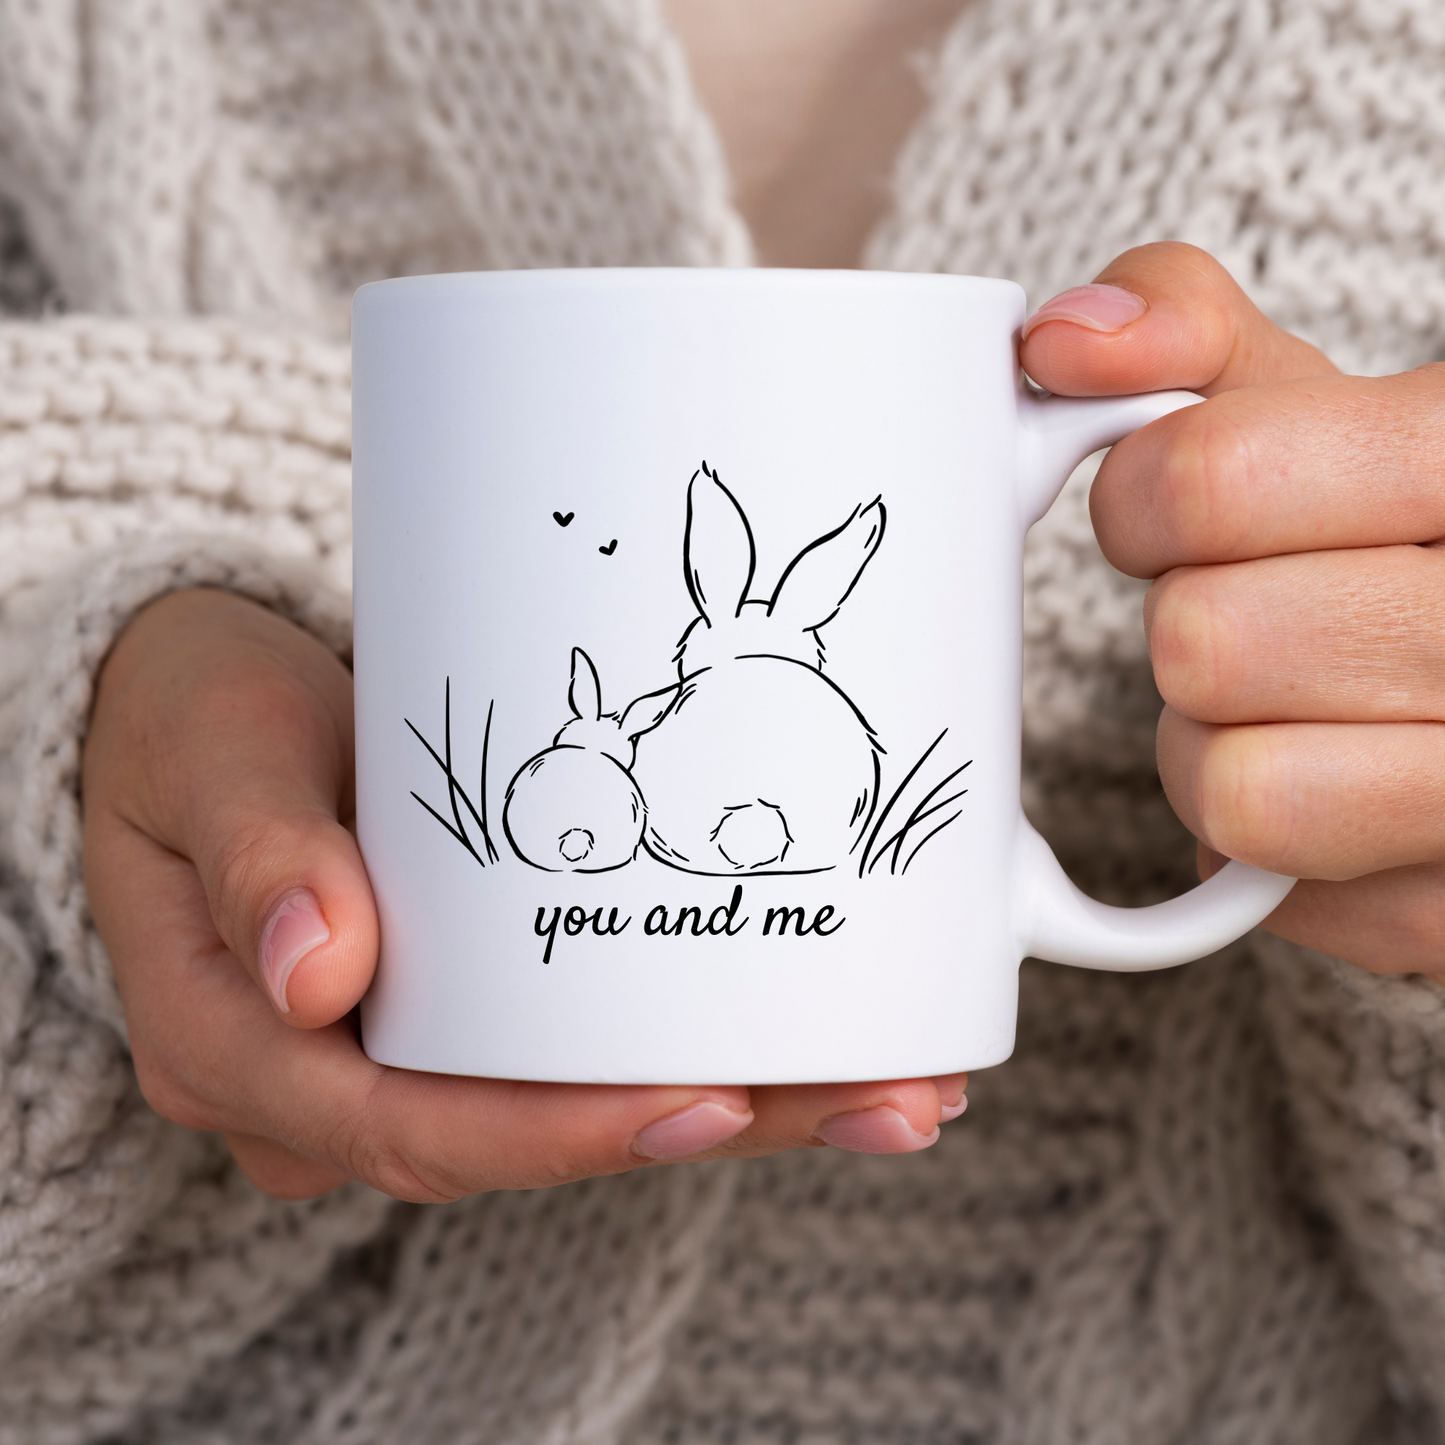 Tasse "you and me"